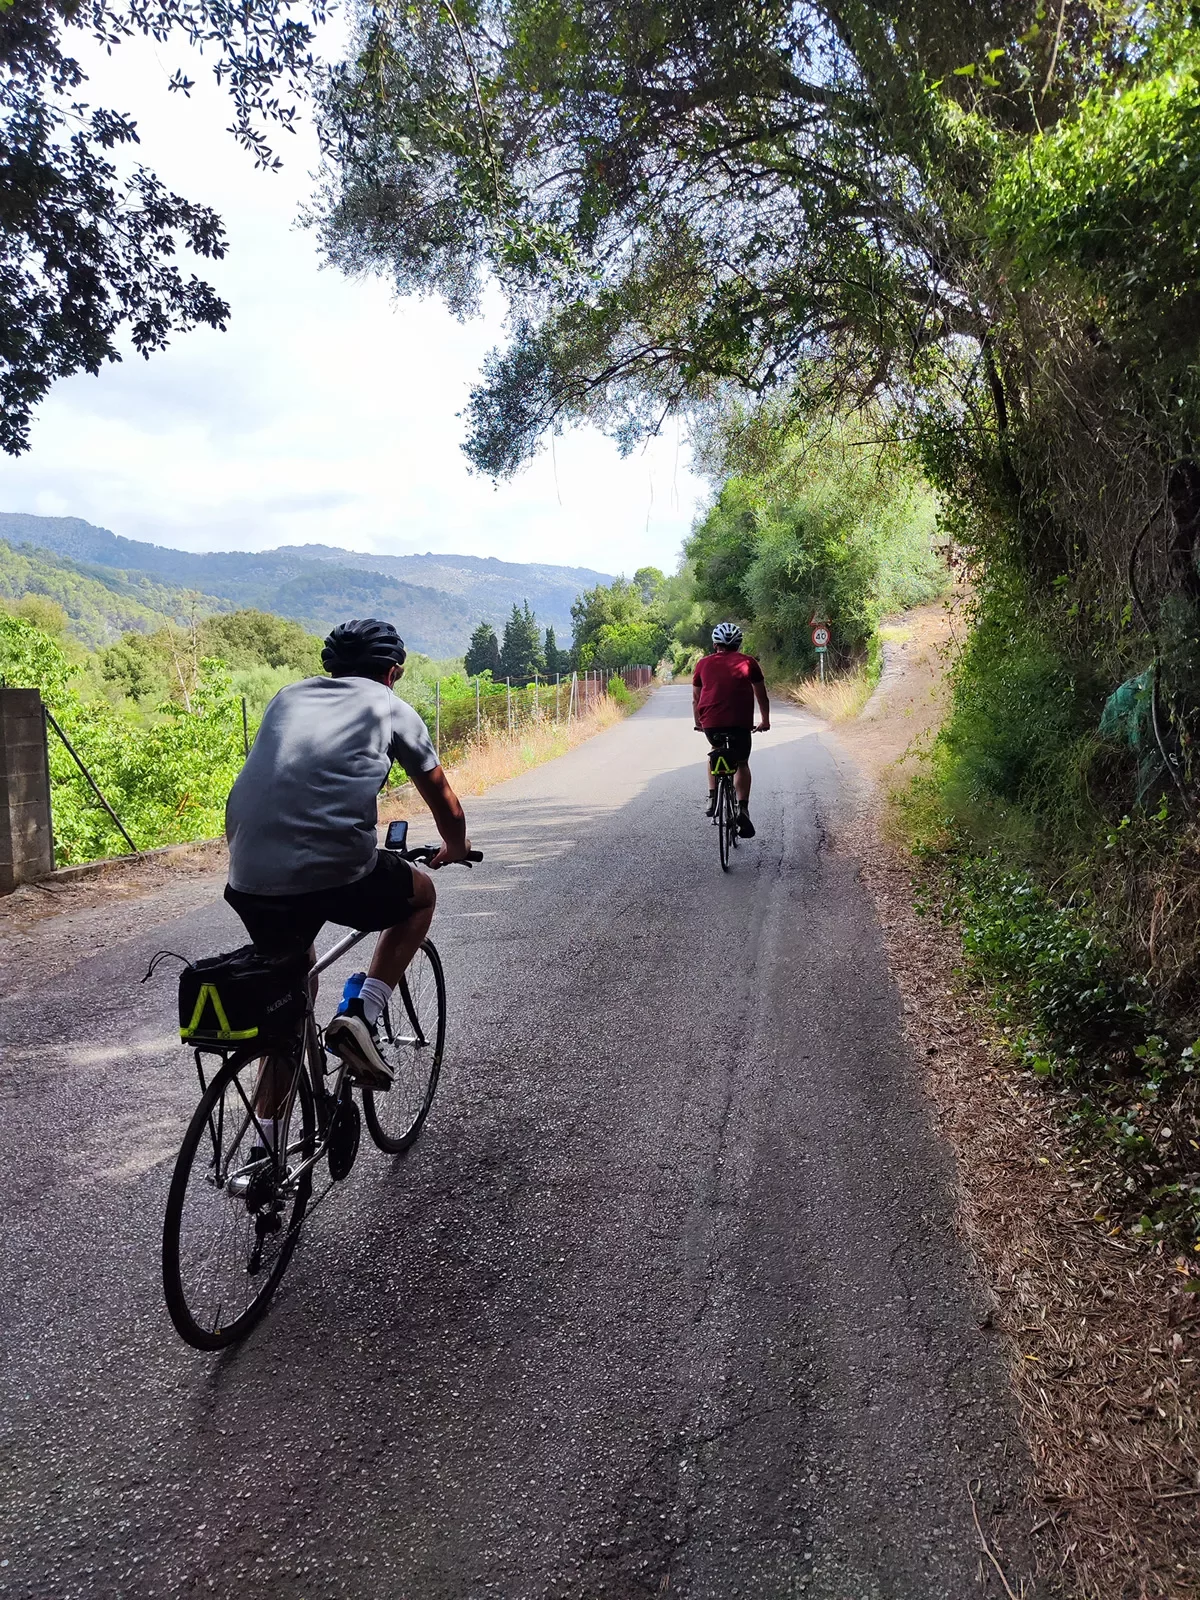 Two guests cycling down tree-covered road, hills in distance.